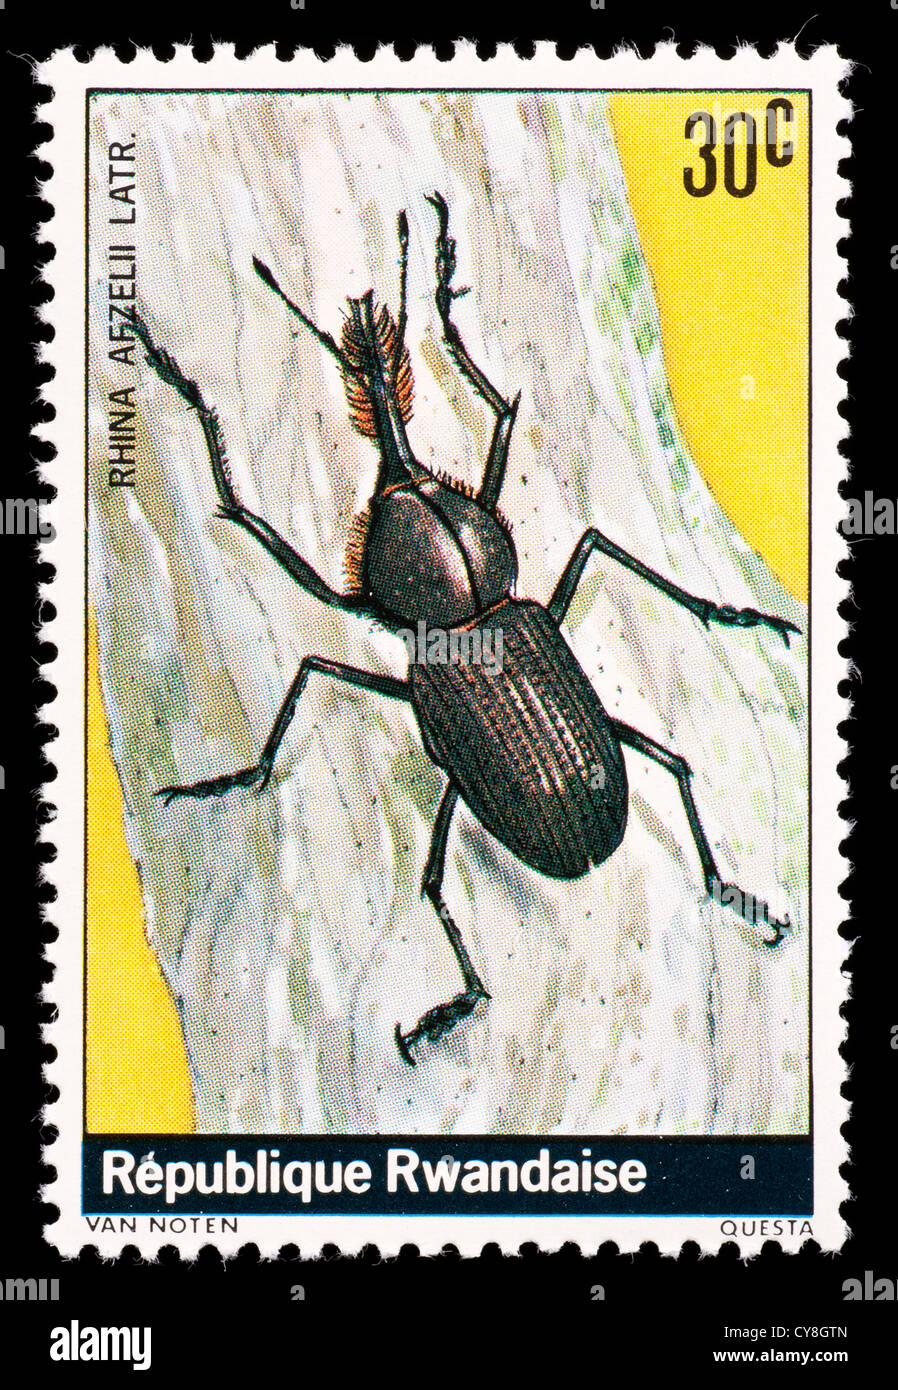 Postage stamp from Rwanda depicting a weevil  (Rhina afzelii) Stock Photo